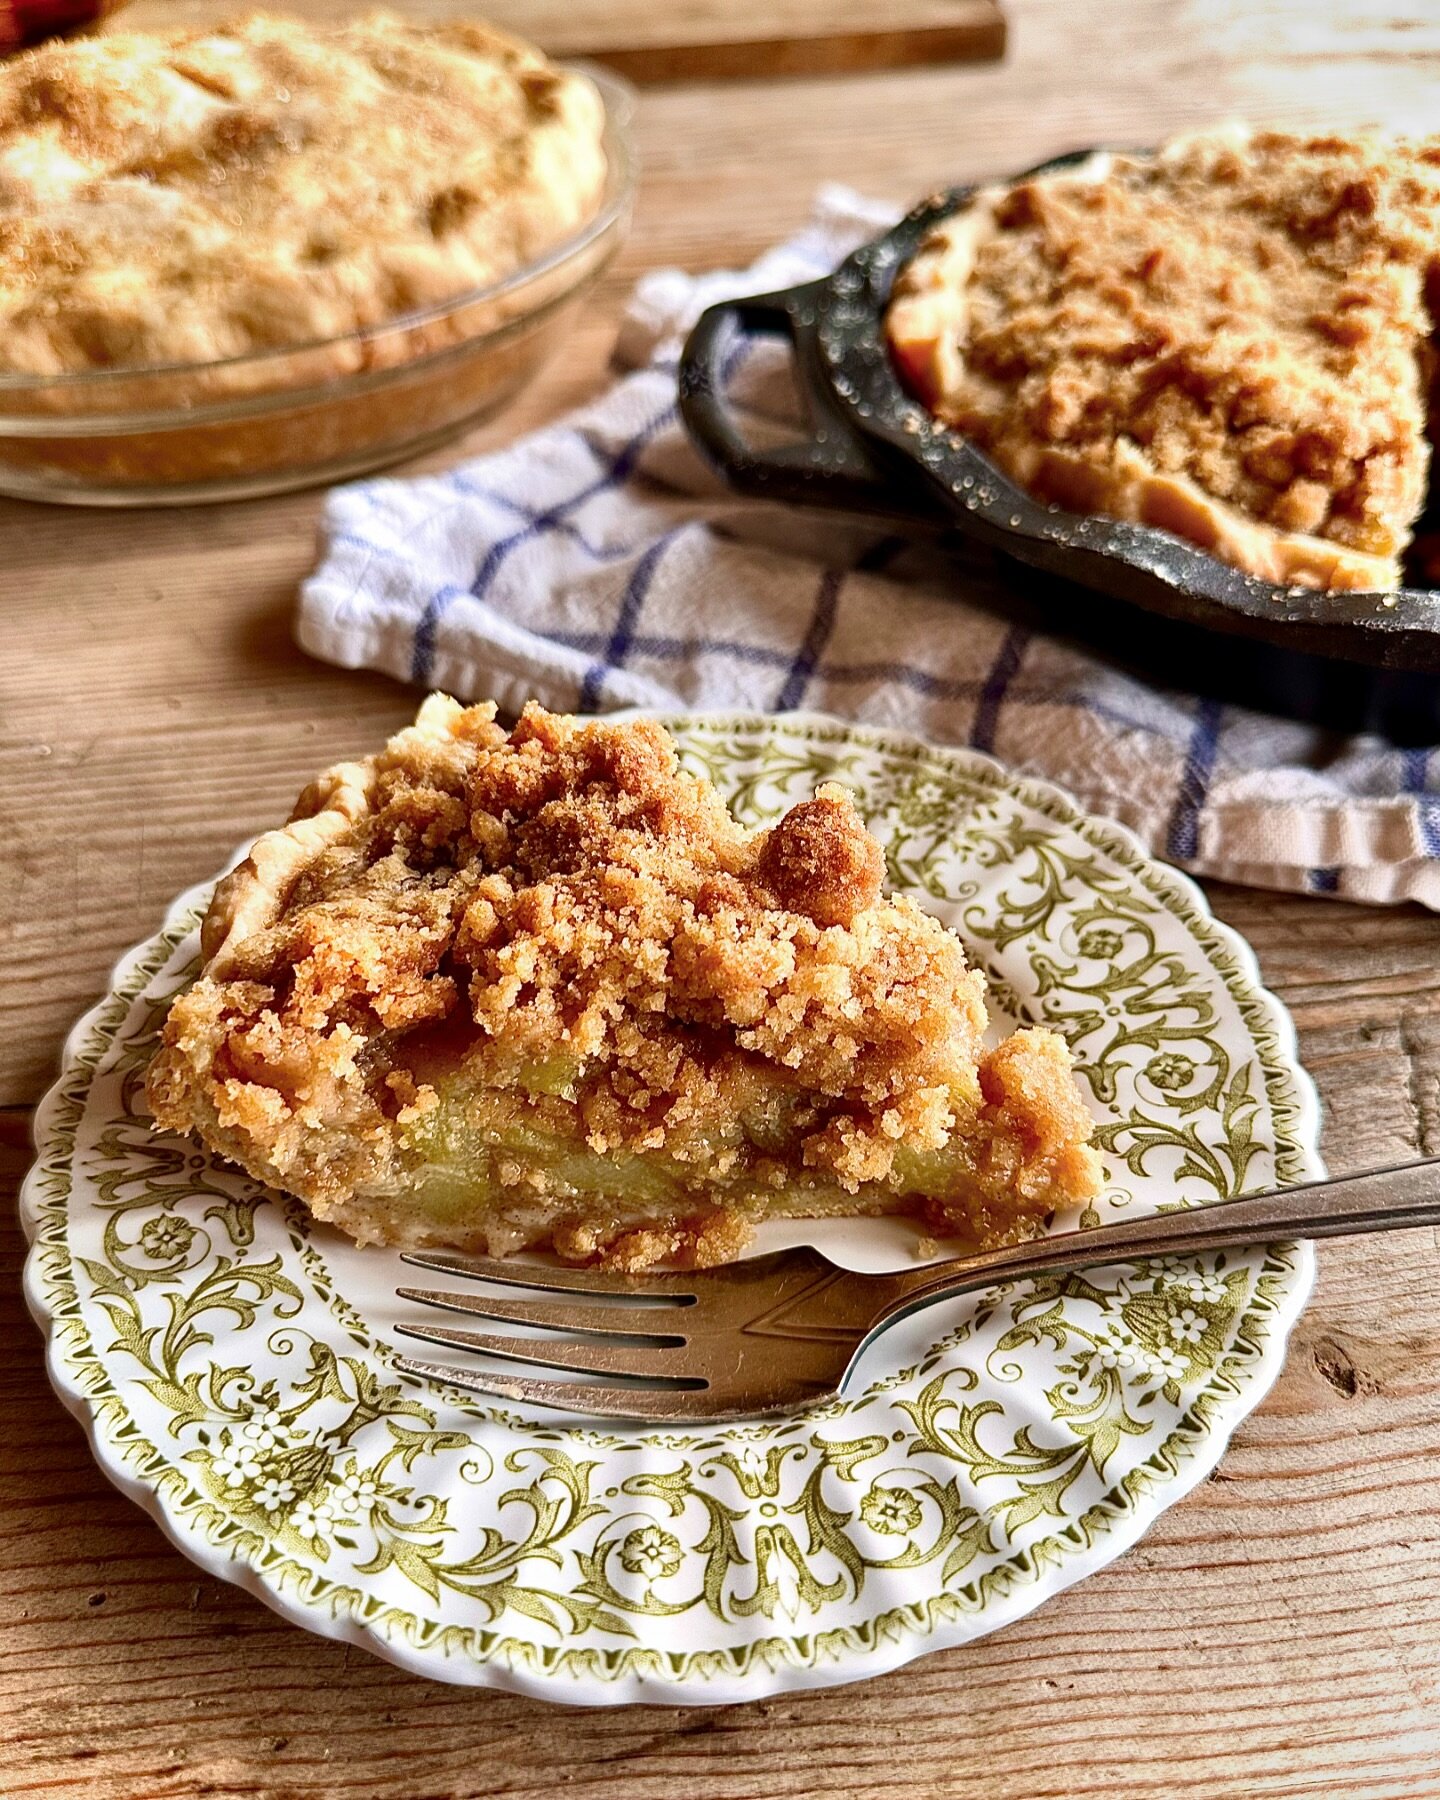 Even round Pie are Squared. 

My Mock Apple Pie is pure Appalachian American, and one of my favorites. This one is done 2 ways! One traditional double crust and one with a crumb topping. 

Celebrate twice as much! Happy Pi (Pie) Day! 

Mock Apple Pie